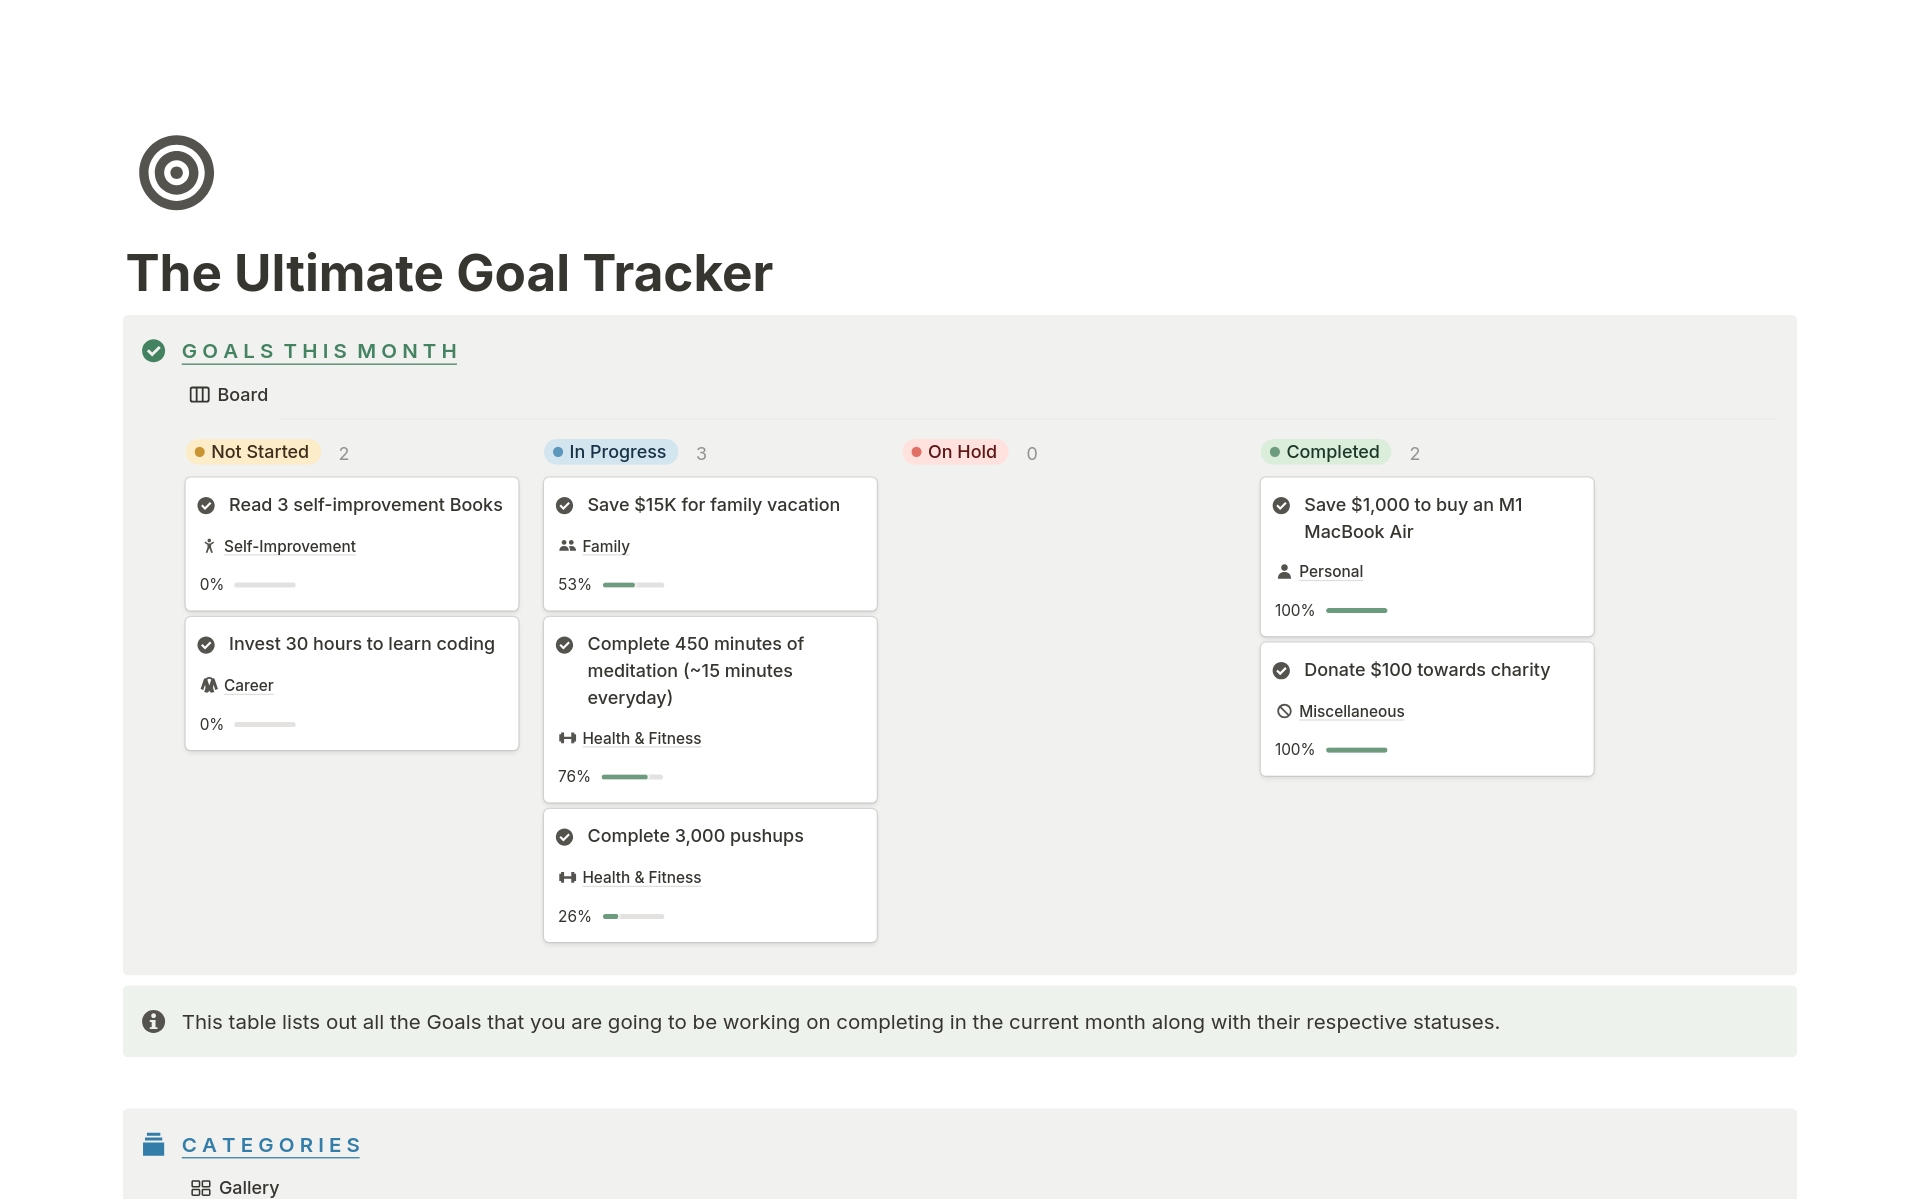 A template preview for The Ultimate Goal Tracker